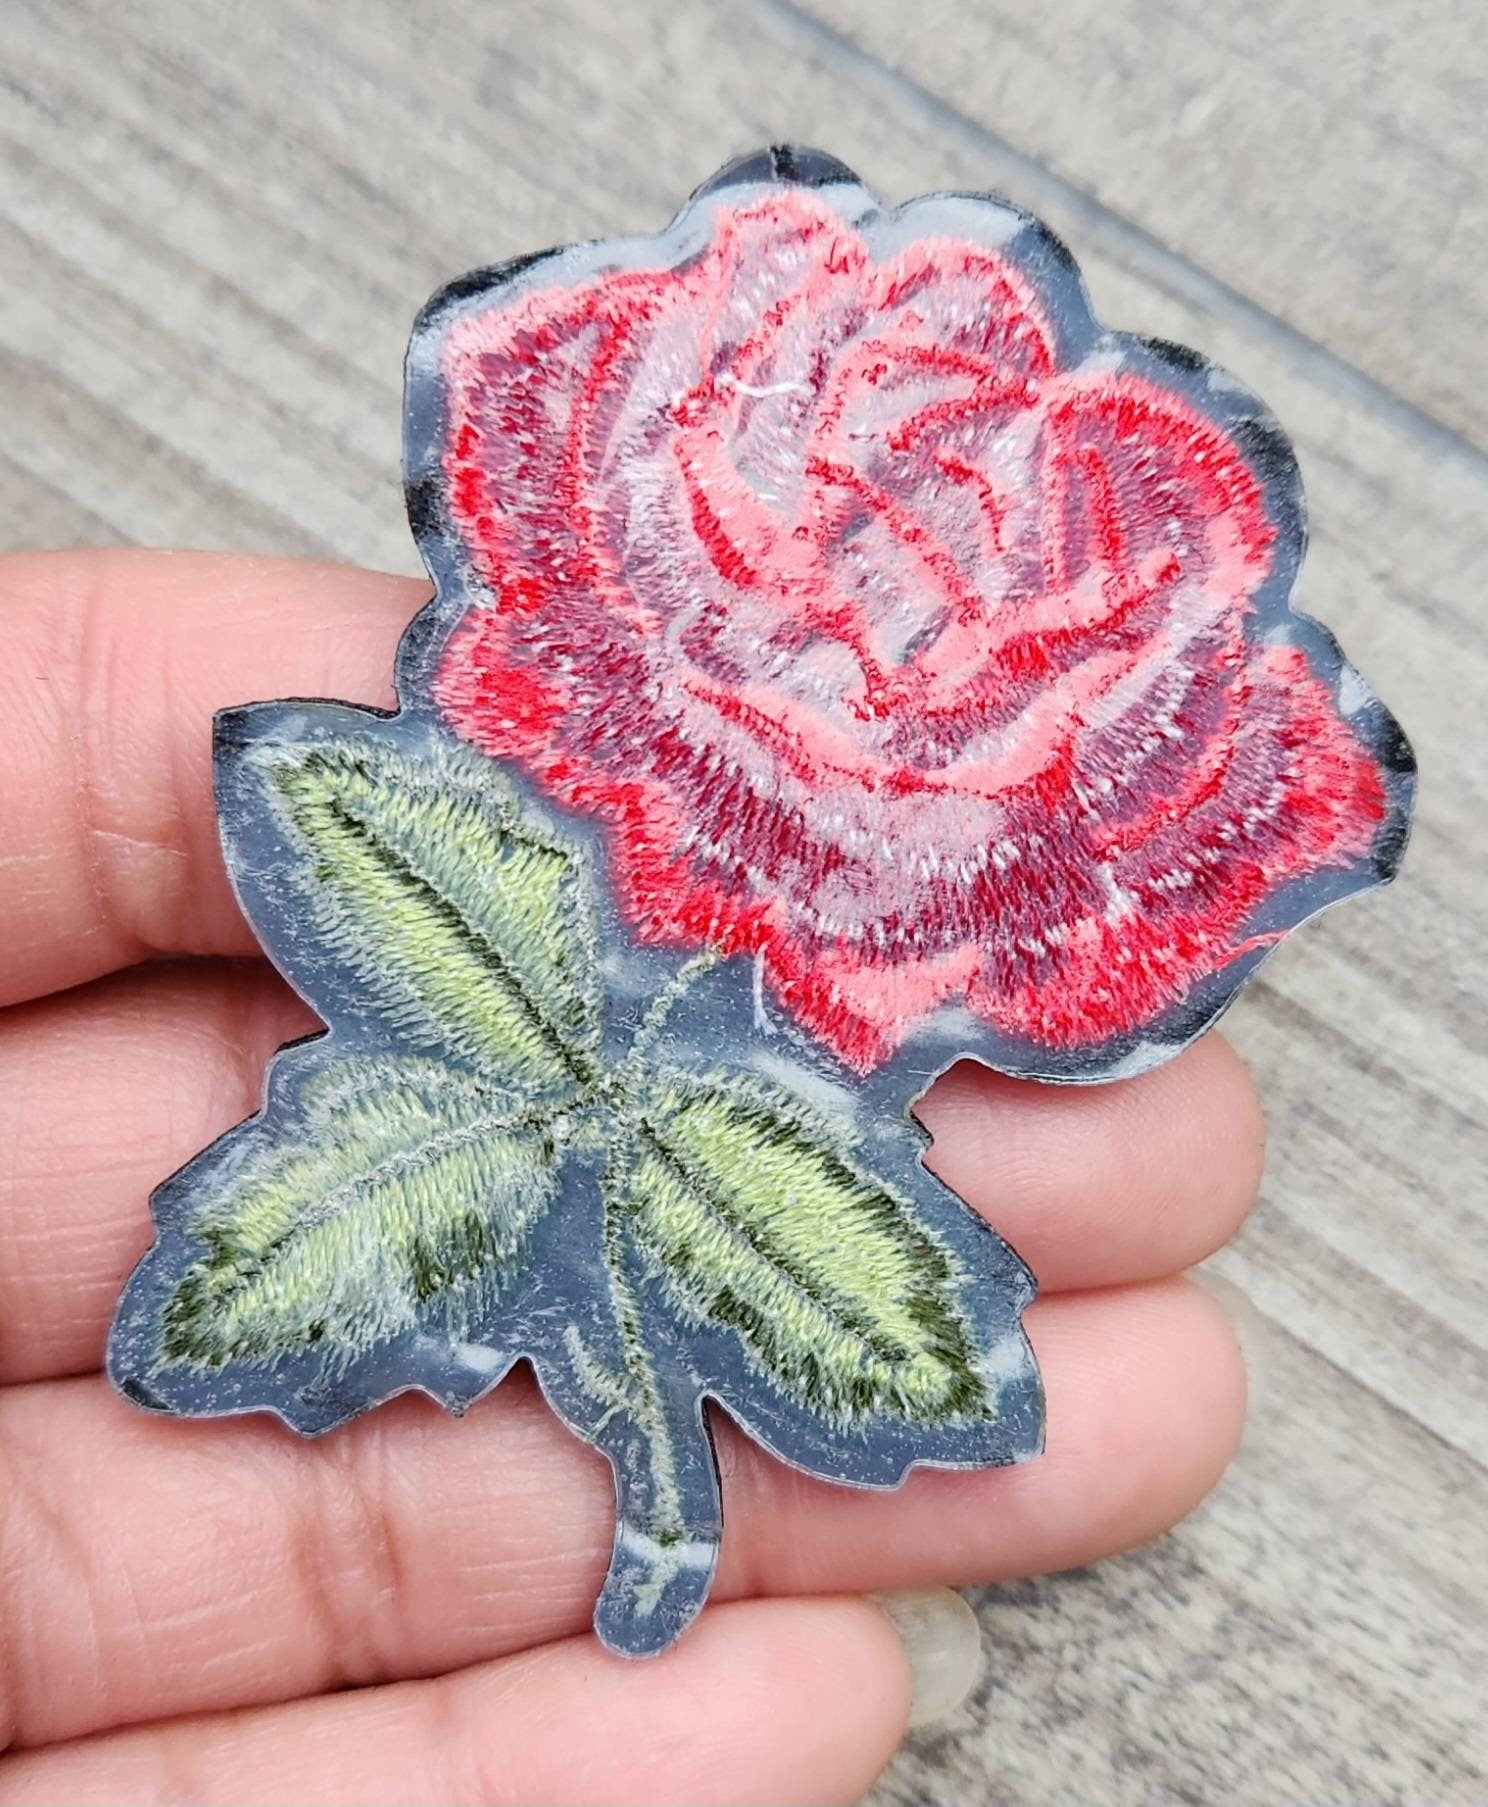 Rosettes, 2 pc Rosebud Set, w/Green Stem (size 3-inches), Matching Embroidered Iron-on Floral Patches, Flower Patches for Clothing